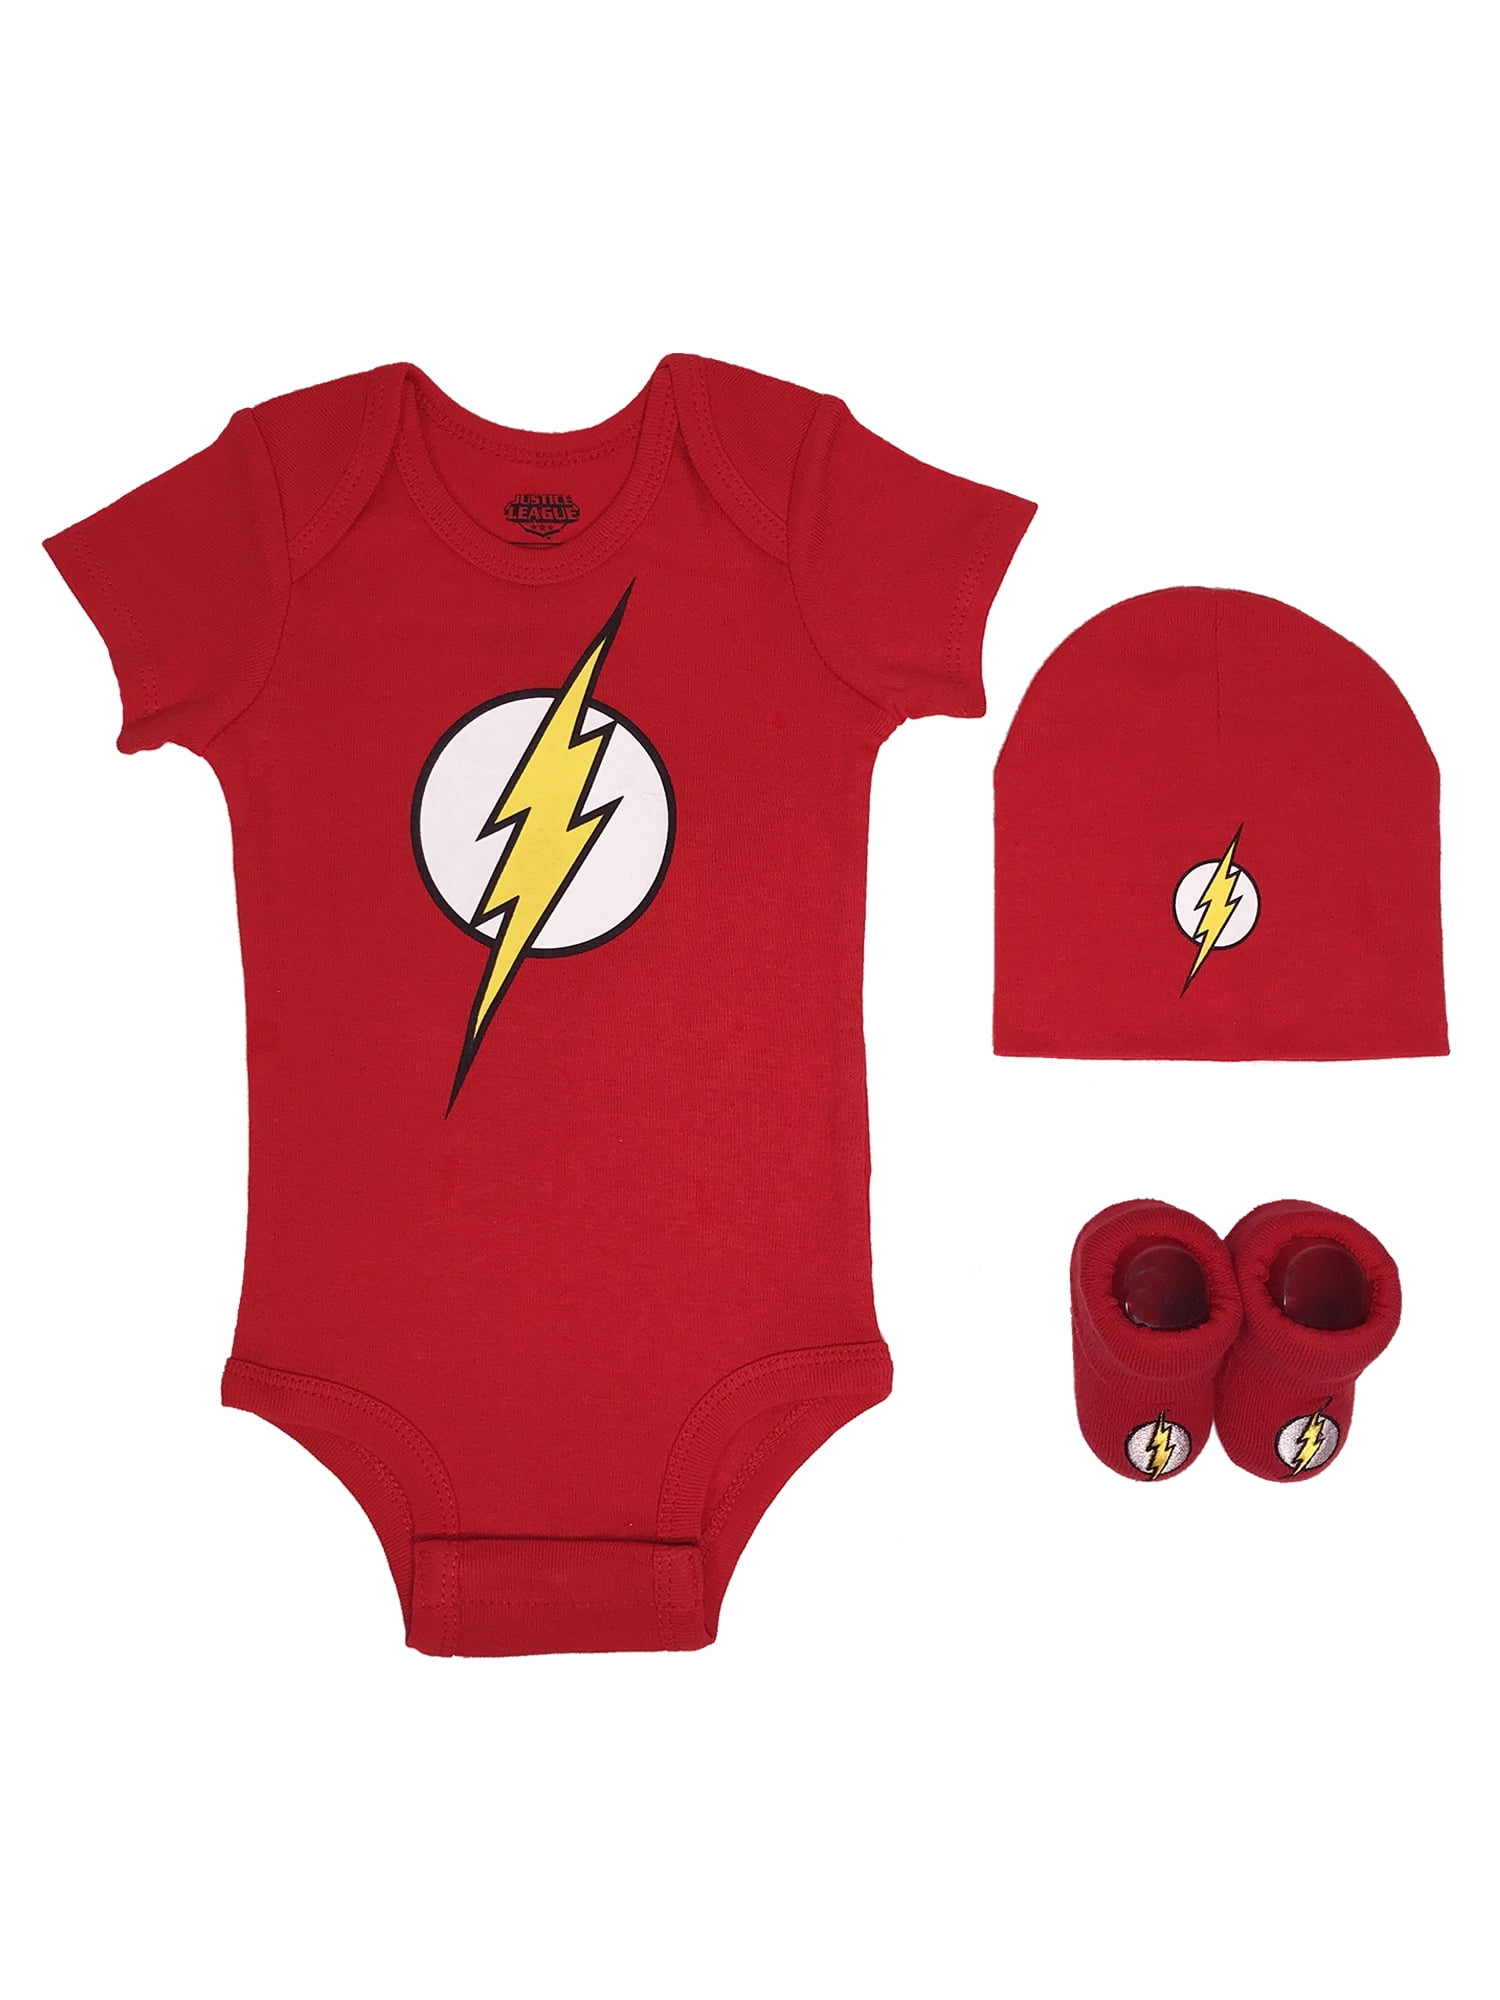 justice league baby clothes